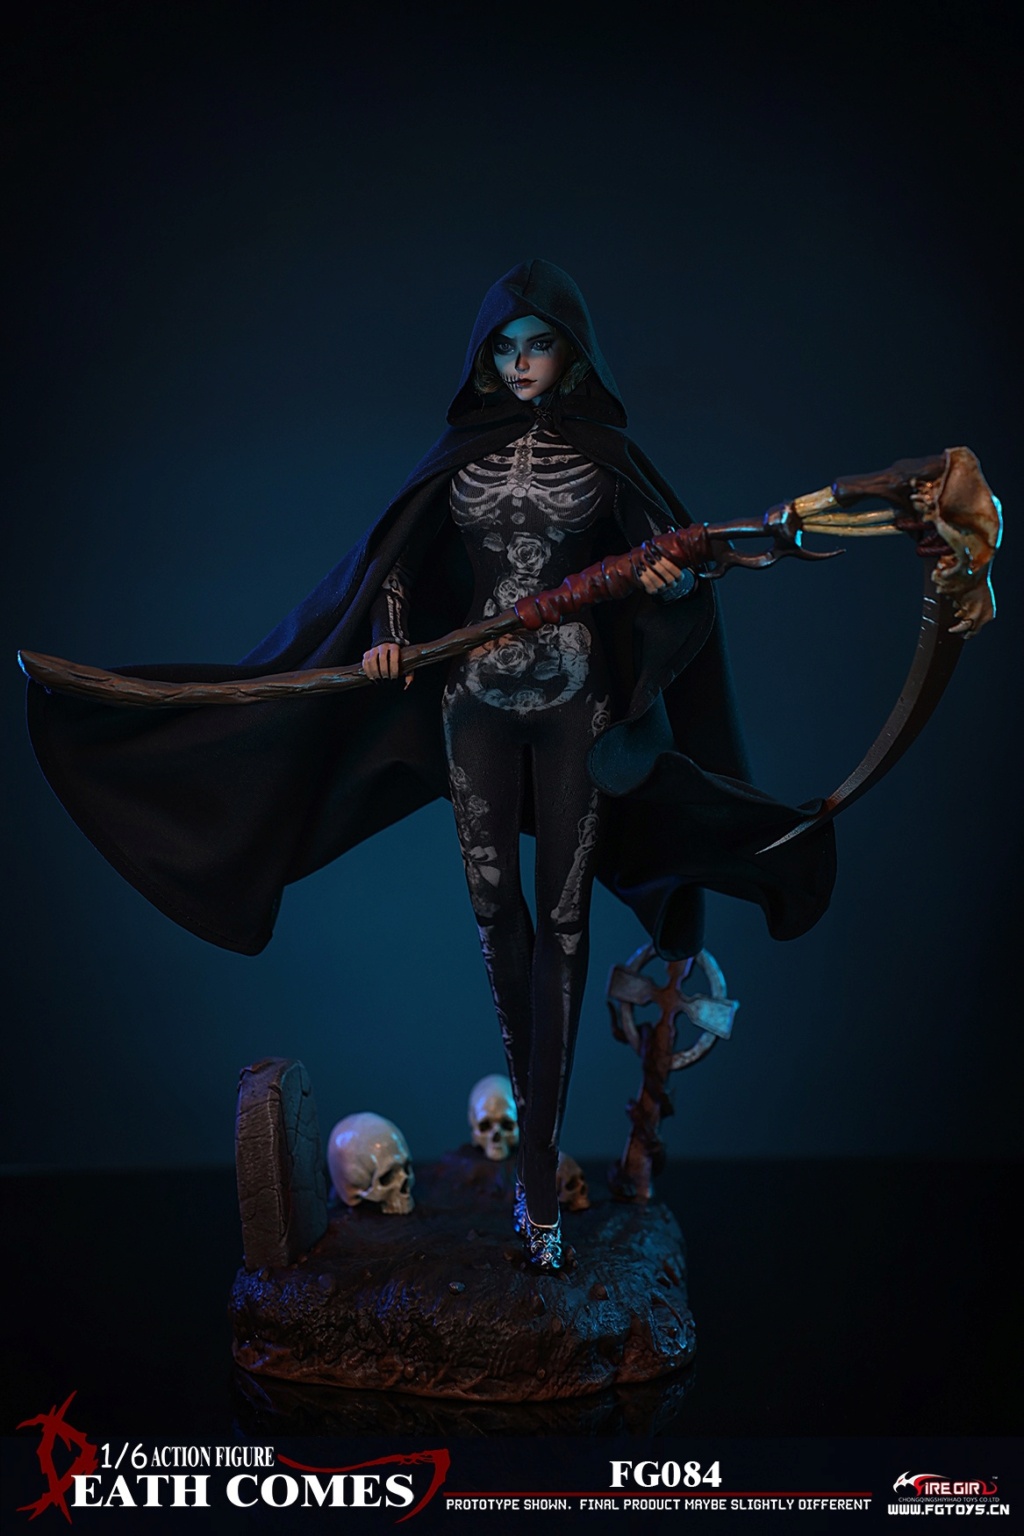 NEW PRODUCT: Fire Girl Toys: 1/6 Death Comes #FG084 female 18101013